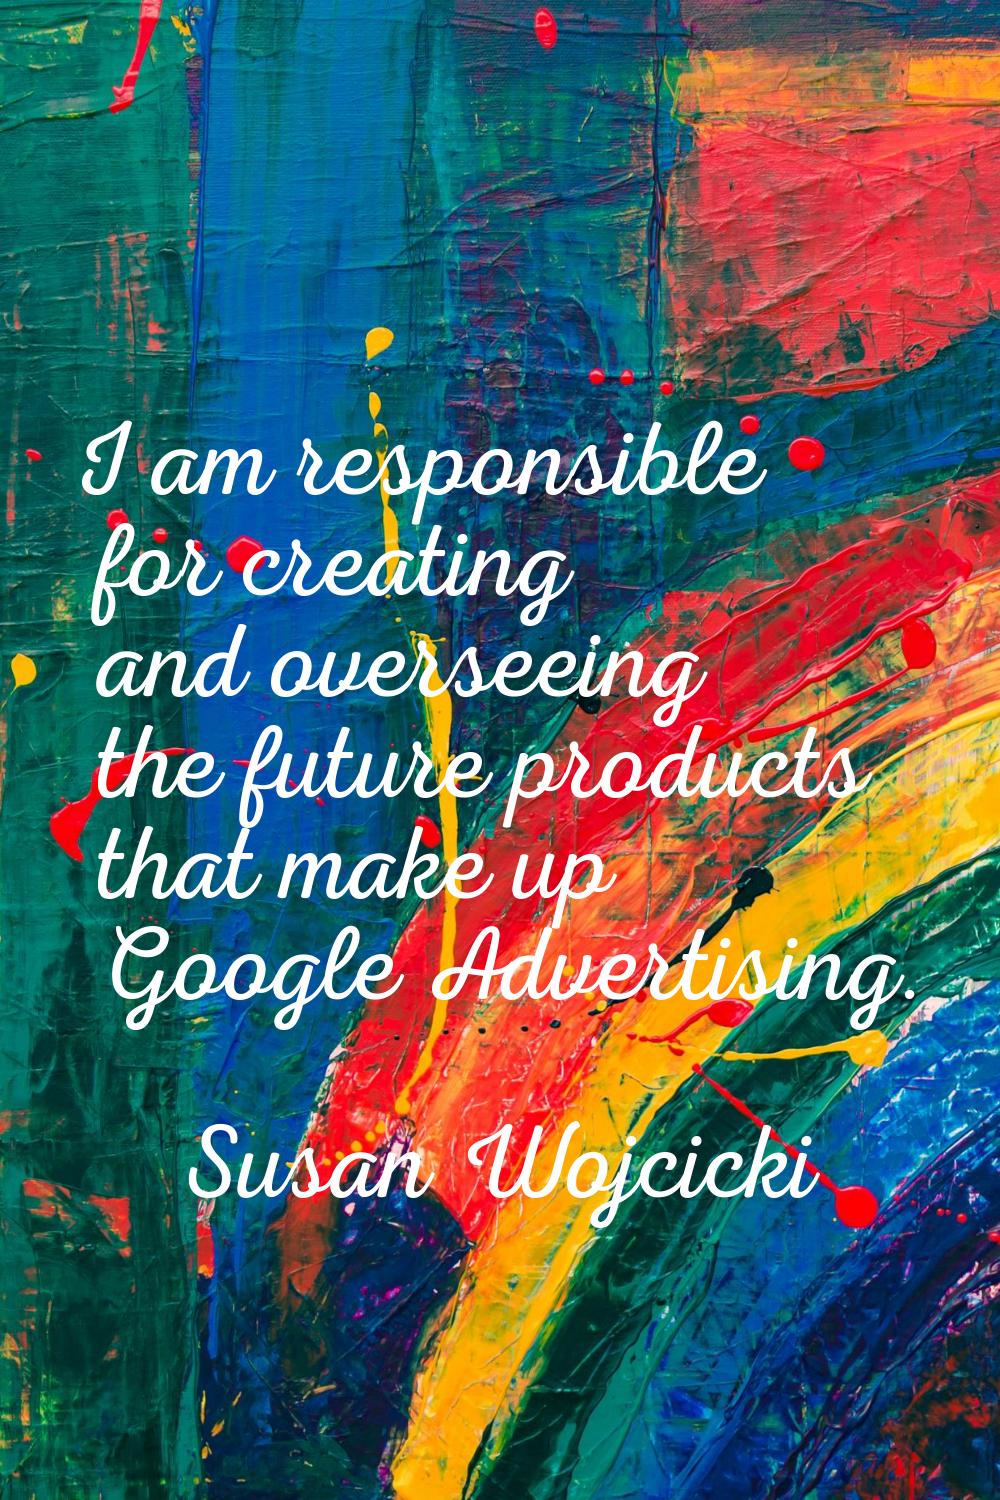 I am responsible for creating and overseeing the future products that make up Google Advertising.